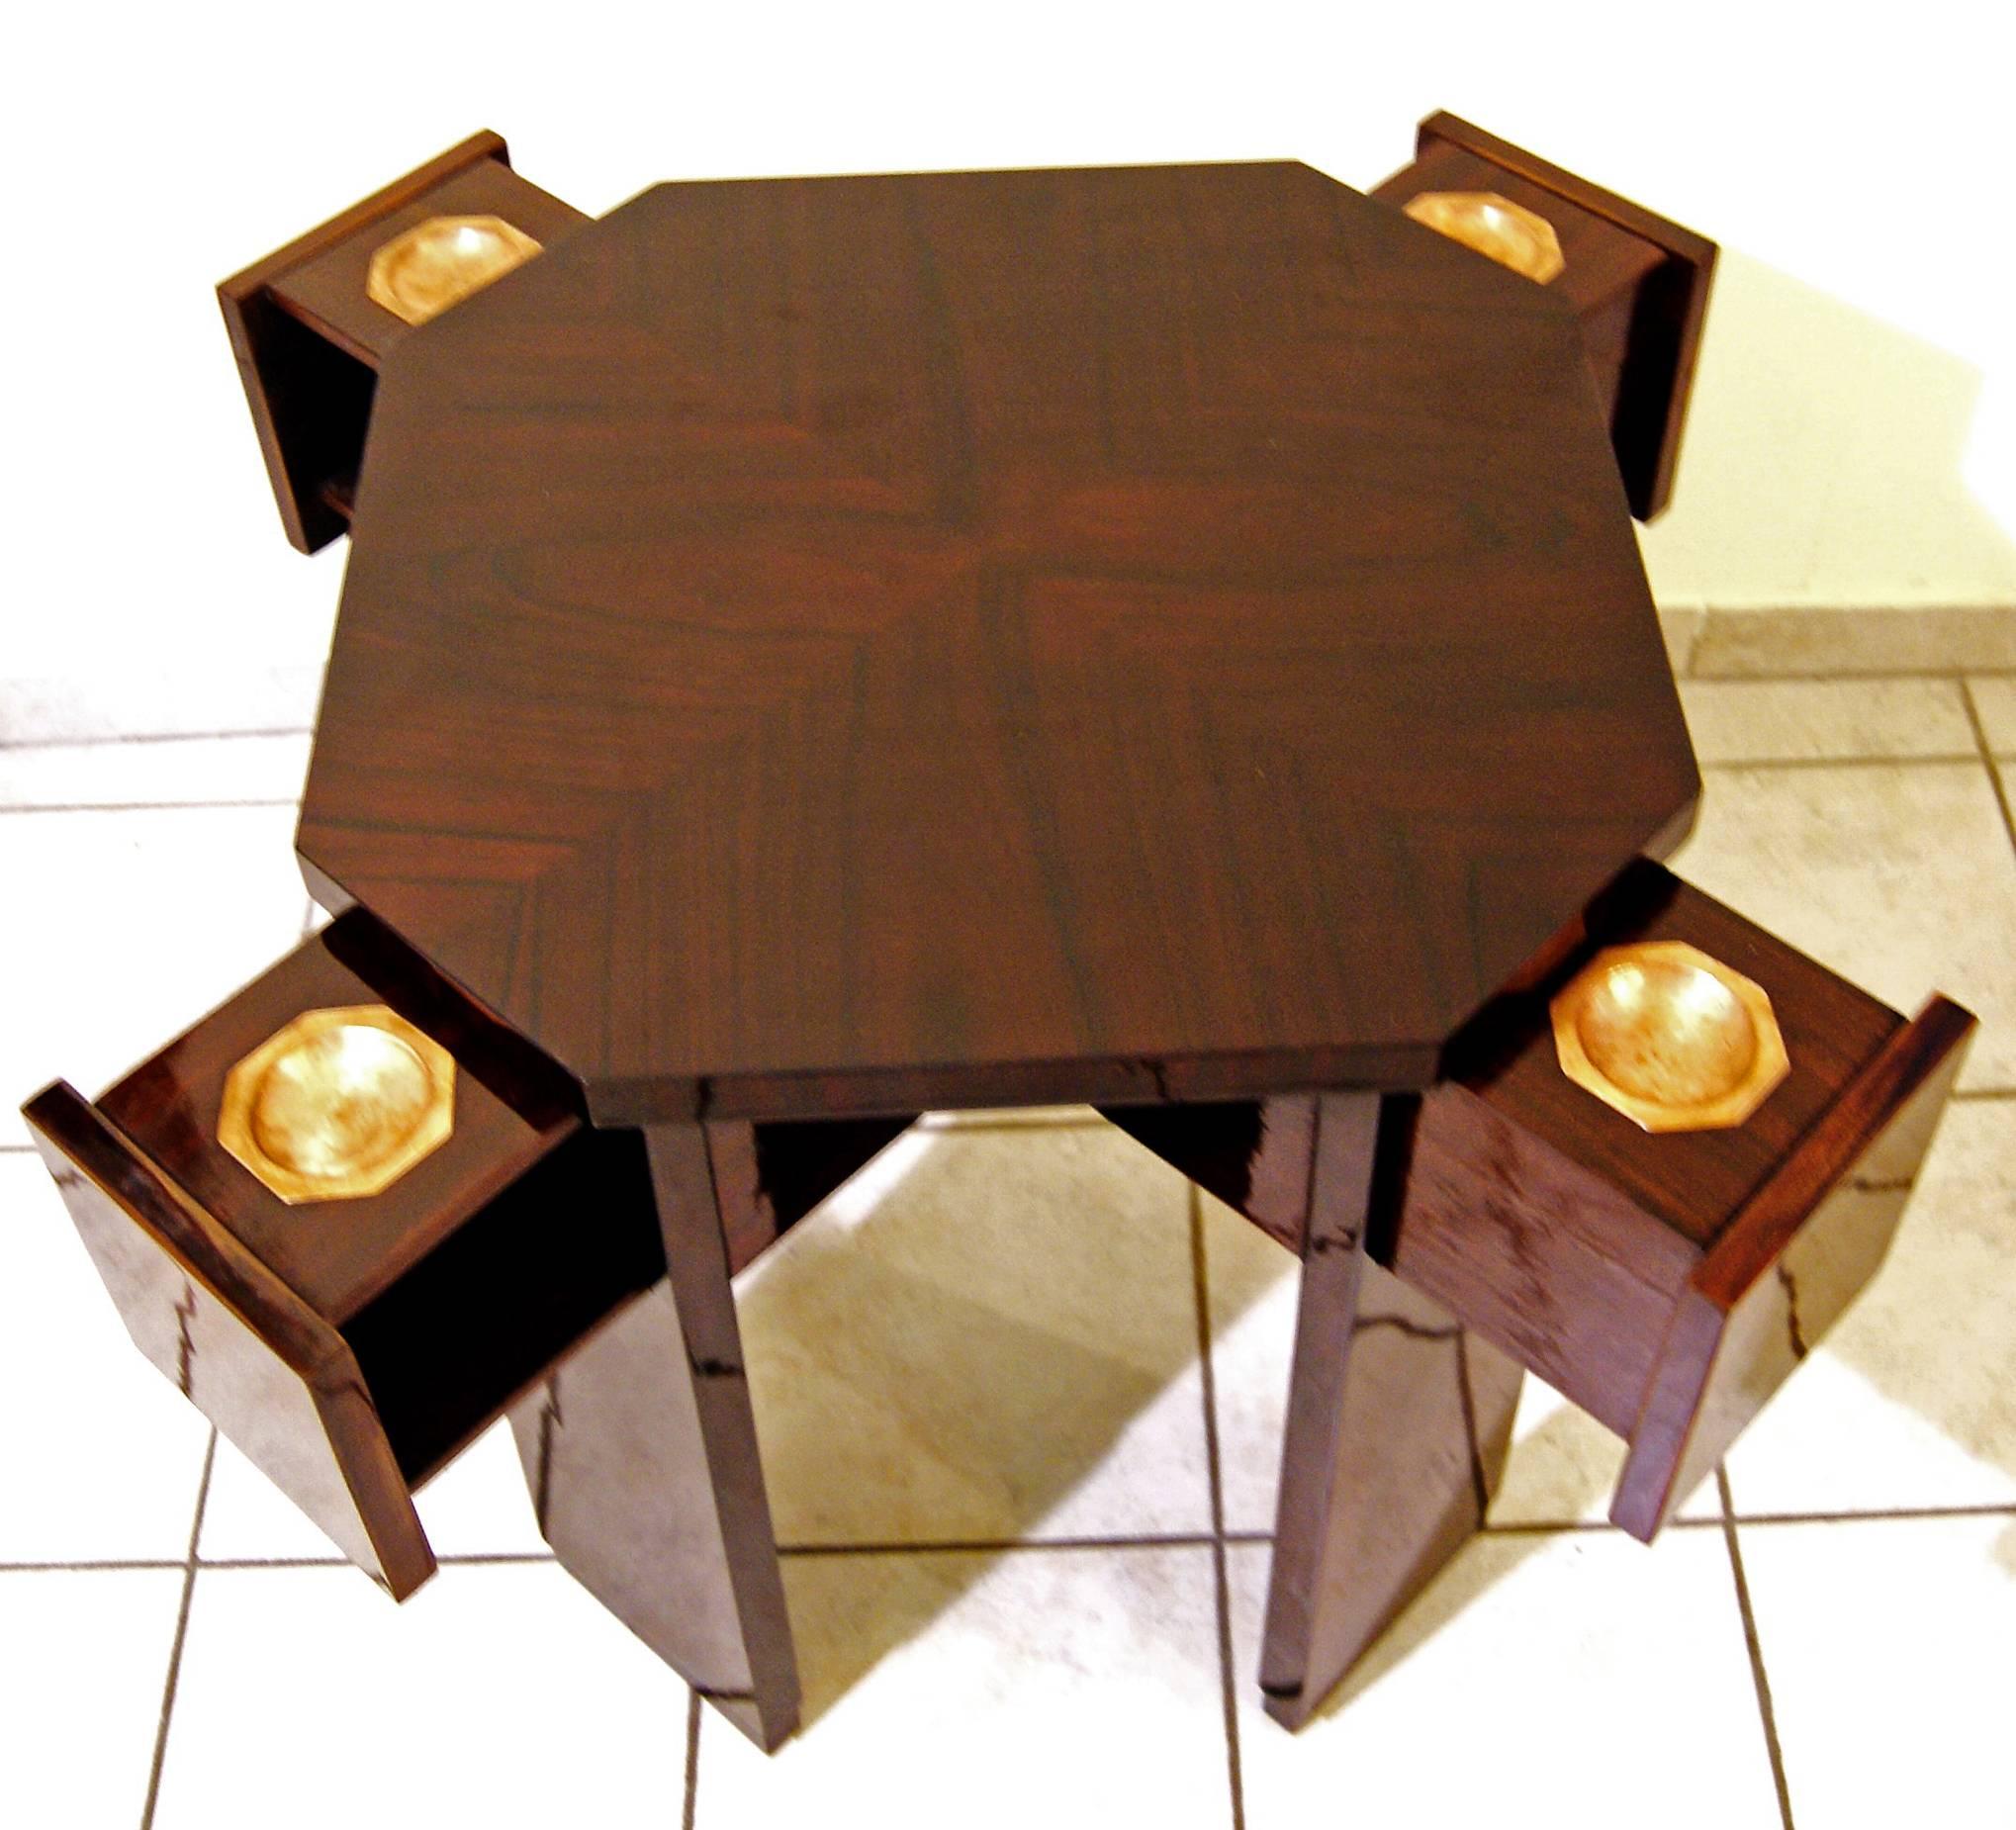 Art Nouveau game table (vintage),
Vienna, made circa 1900.
 
Rosewood veneer / refurbished by hand / copper fittings existing.
The table's plate is of octagonal form type / additionally, there are four drawers attached to edged areas, holding